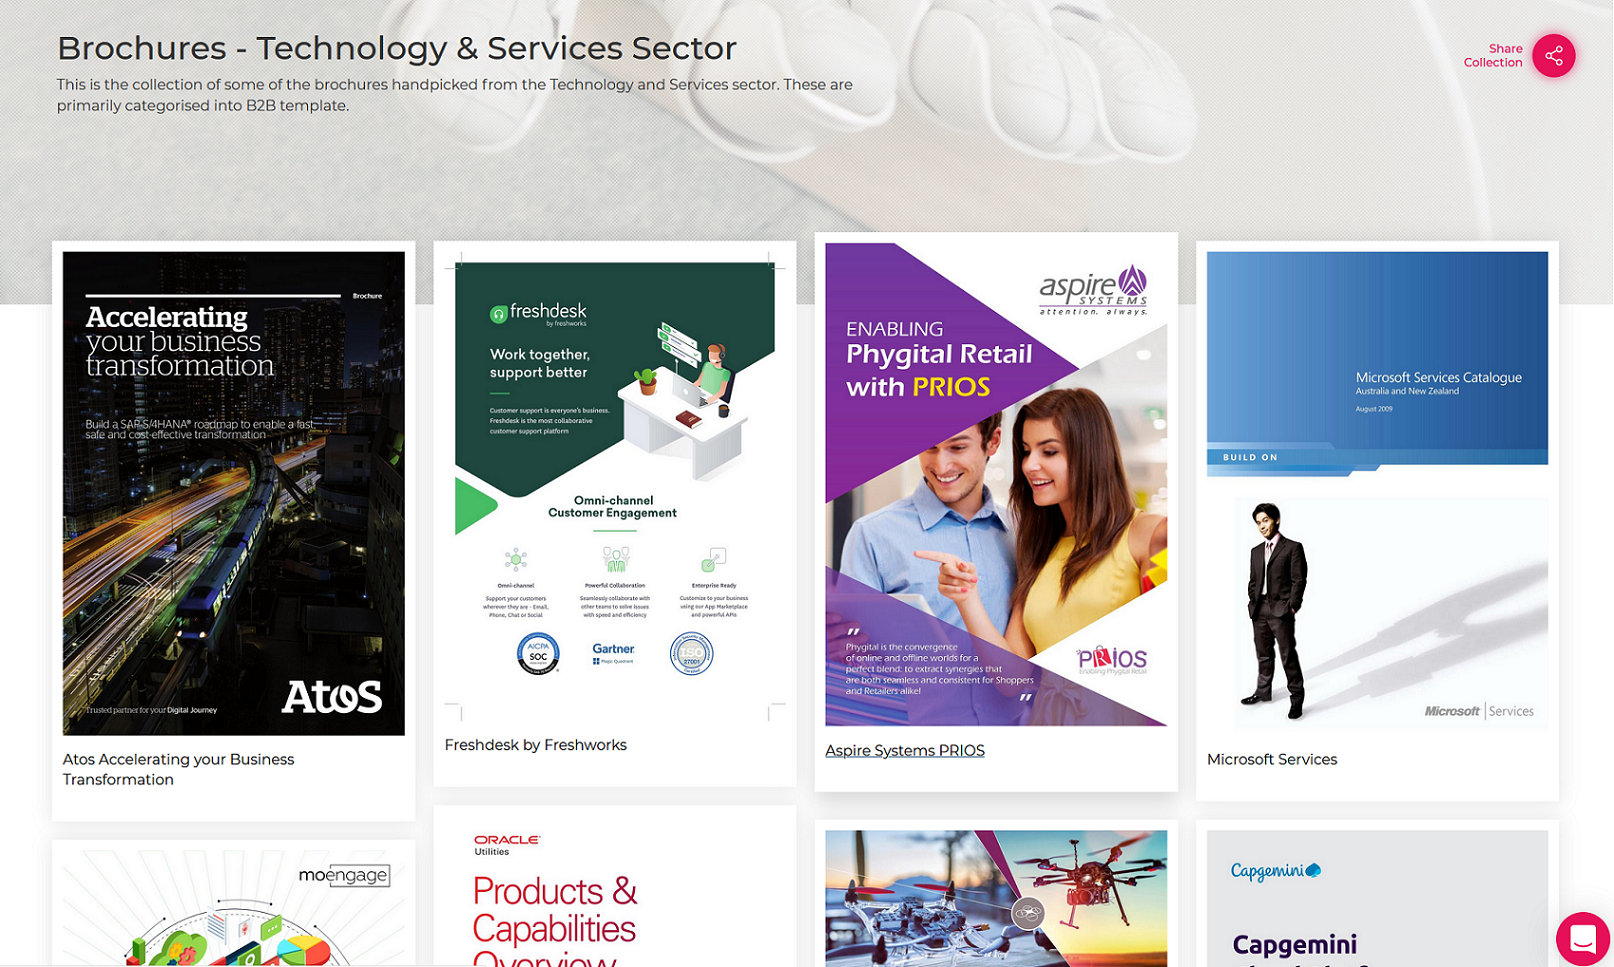 Brochures-Technology & Services